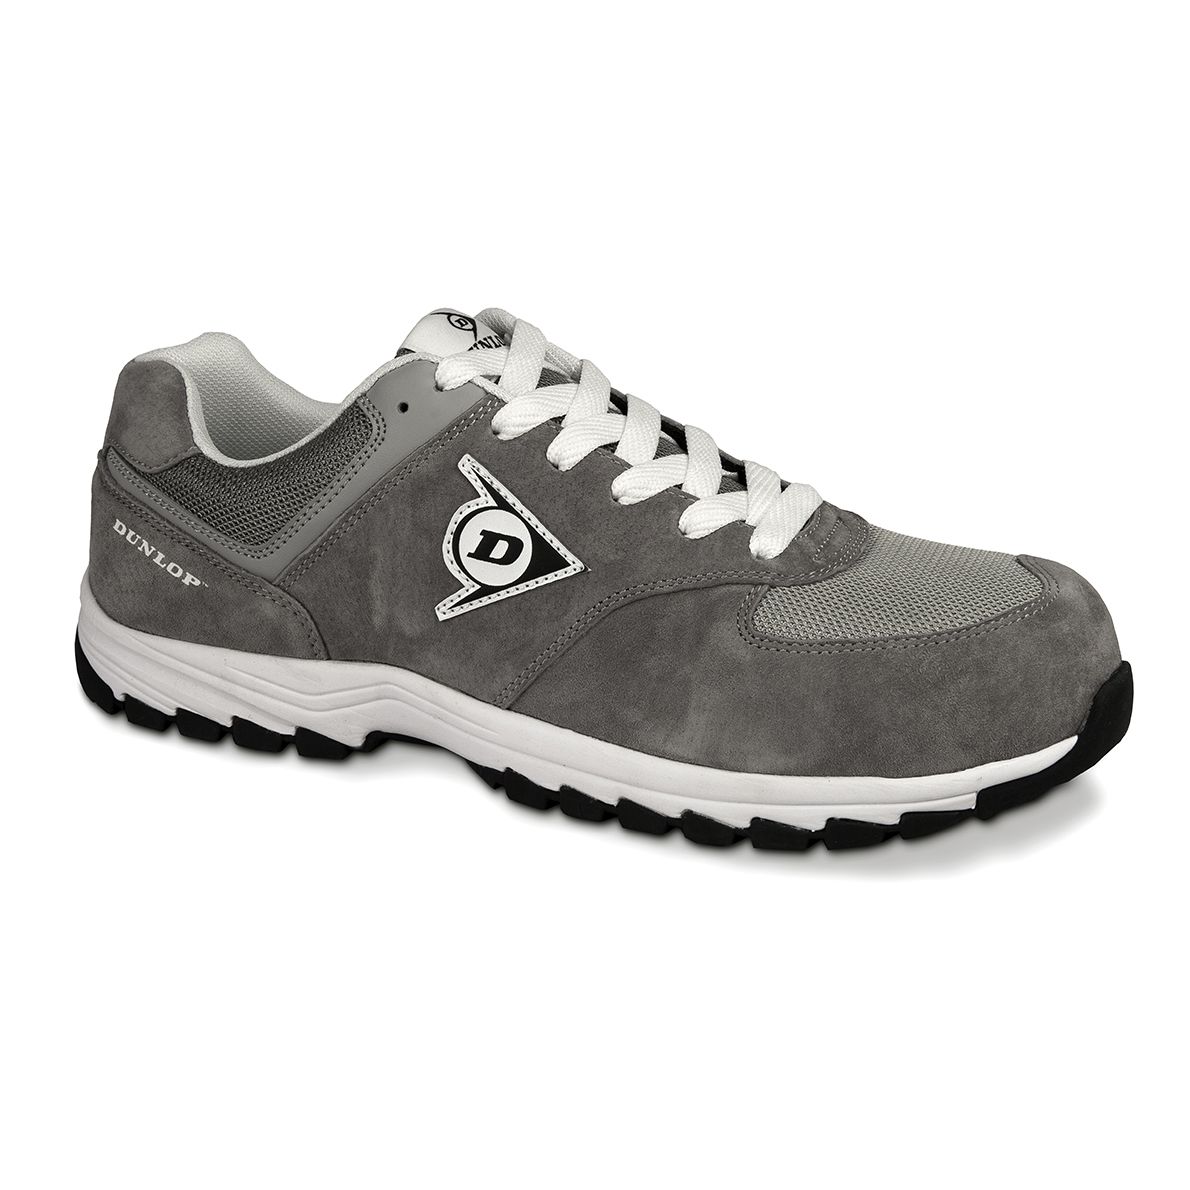 SALE: Dunlop Flying Arrow ED2 S3 safety low shoe, sporty & breathable, grey, size 39